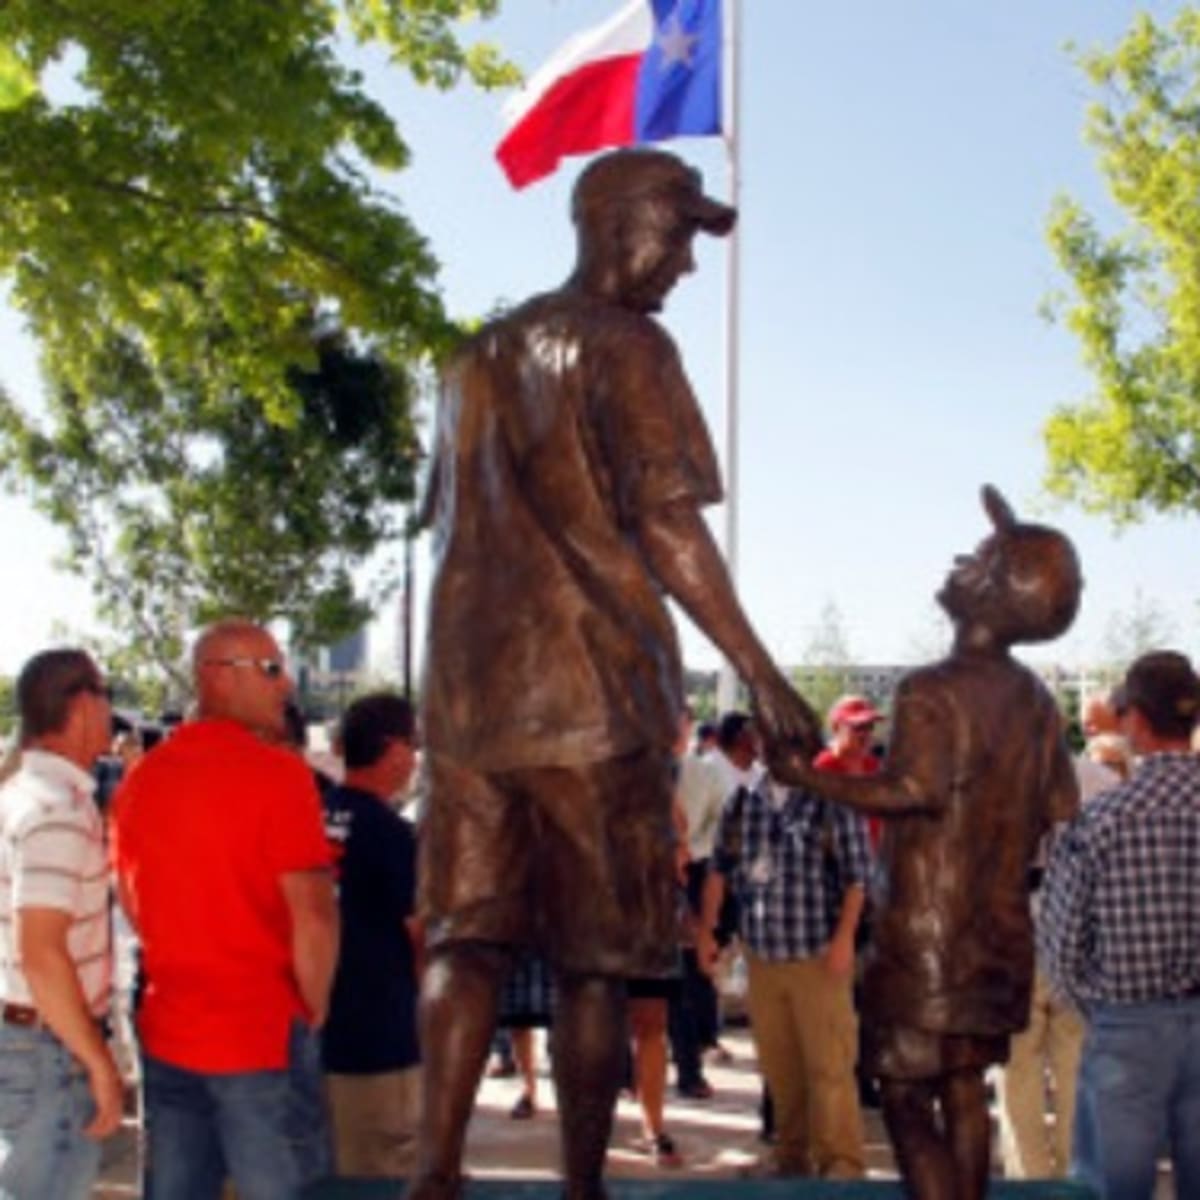 Rangers fans left beer cans all over a statue honoring deceased